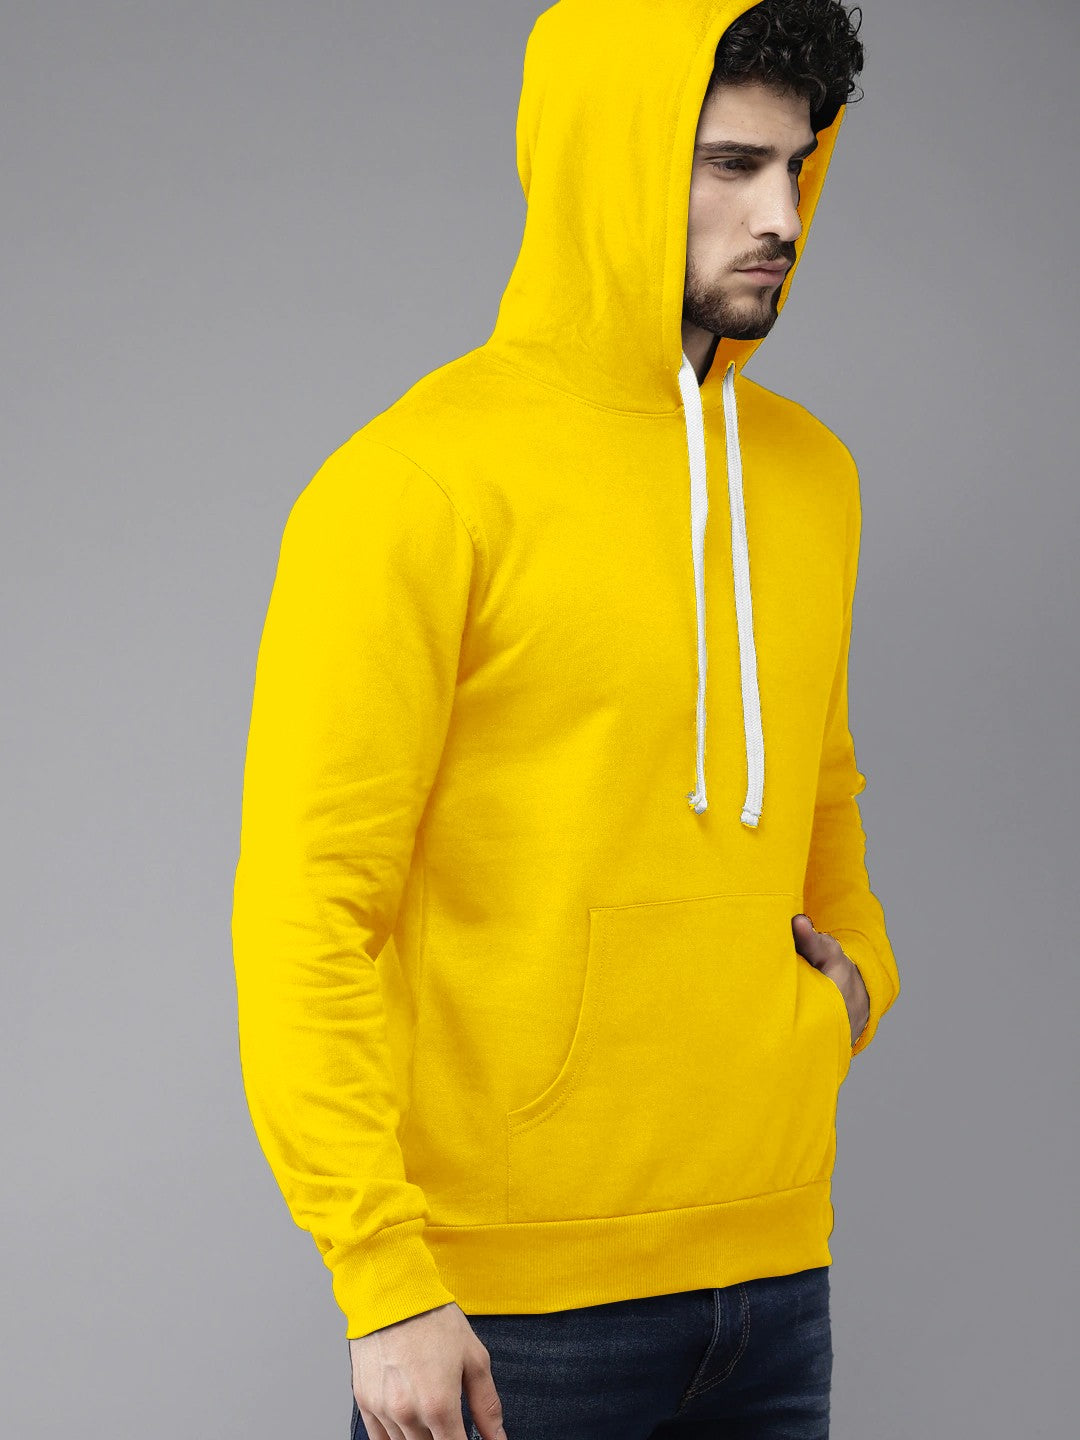 Yellow Colour High Quality Premium Hoodie For Men